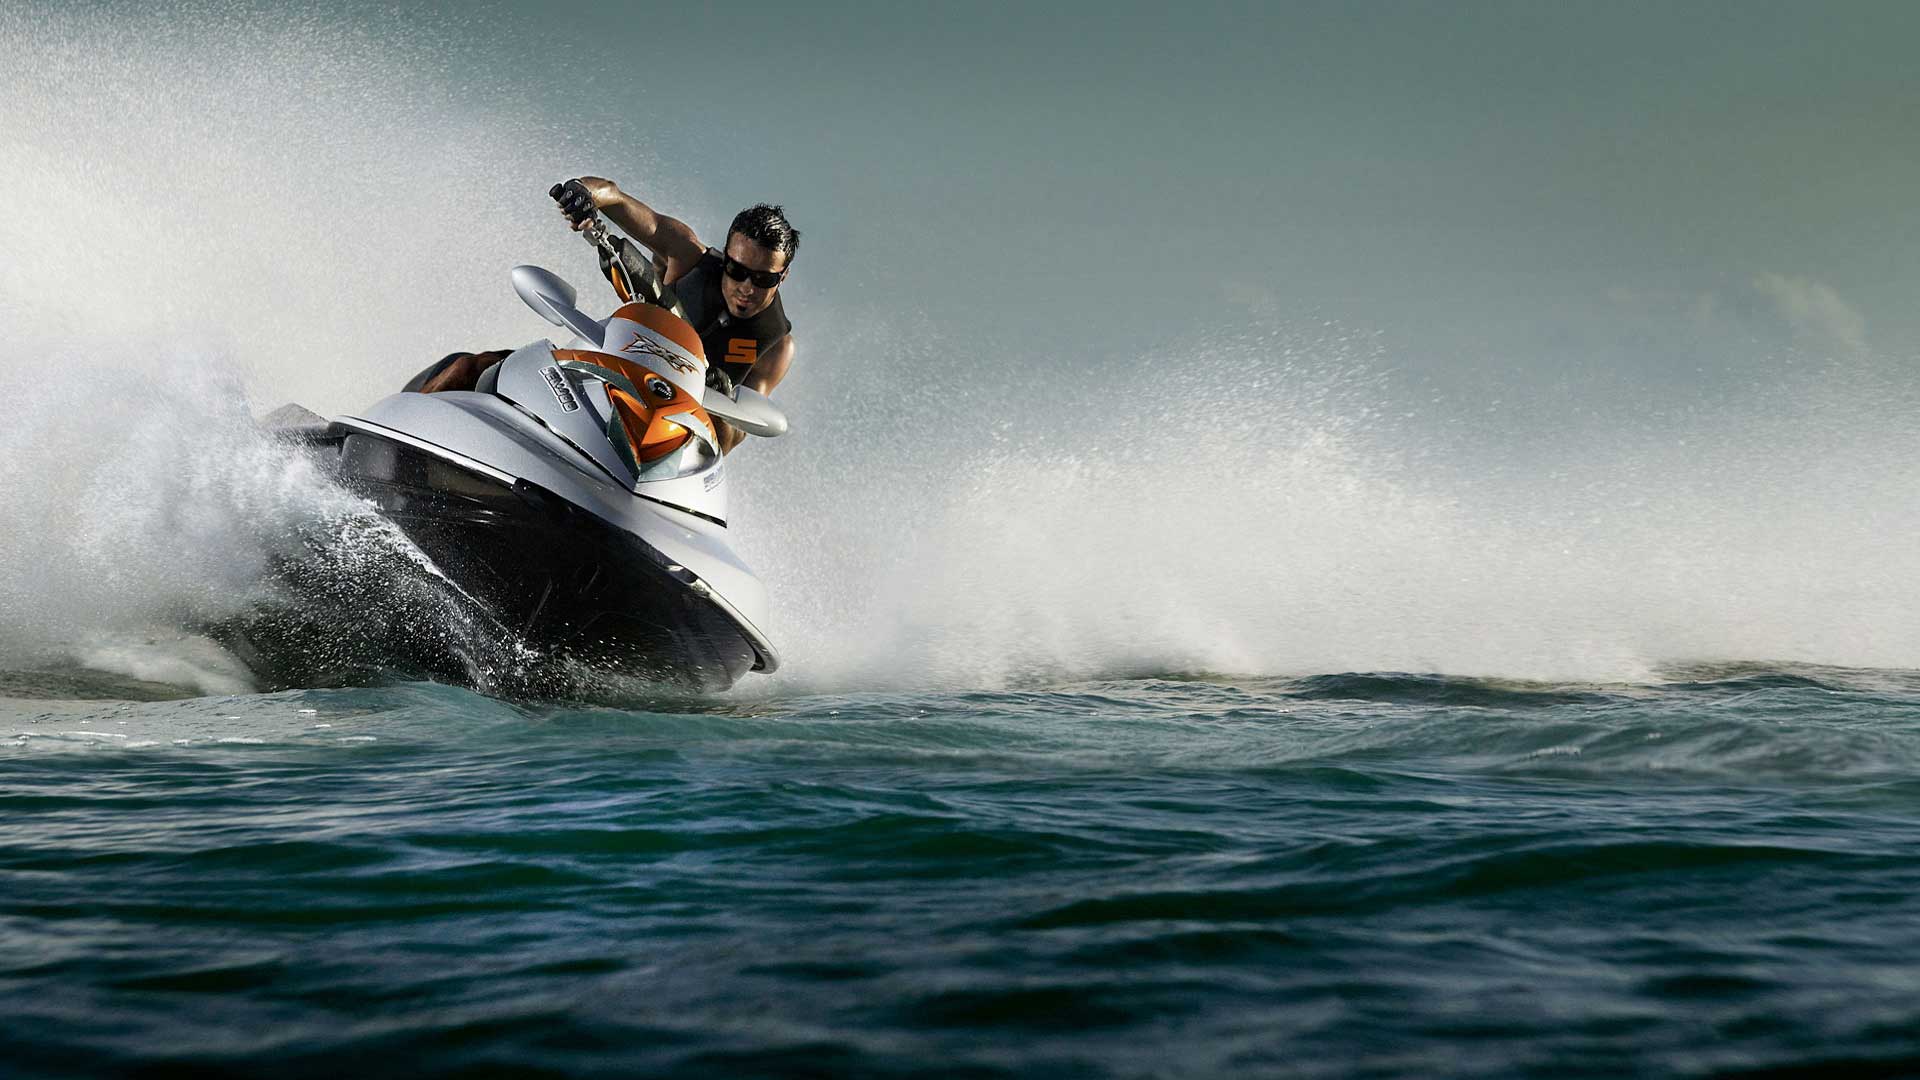 Adrenaline ride in groups on a jet ski